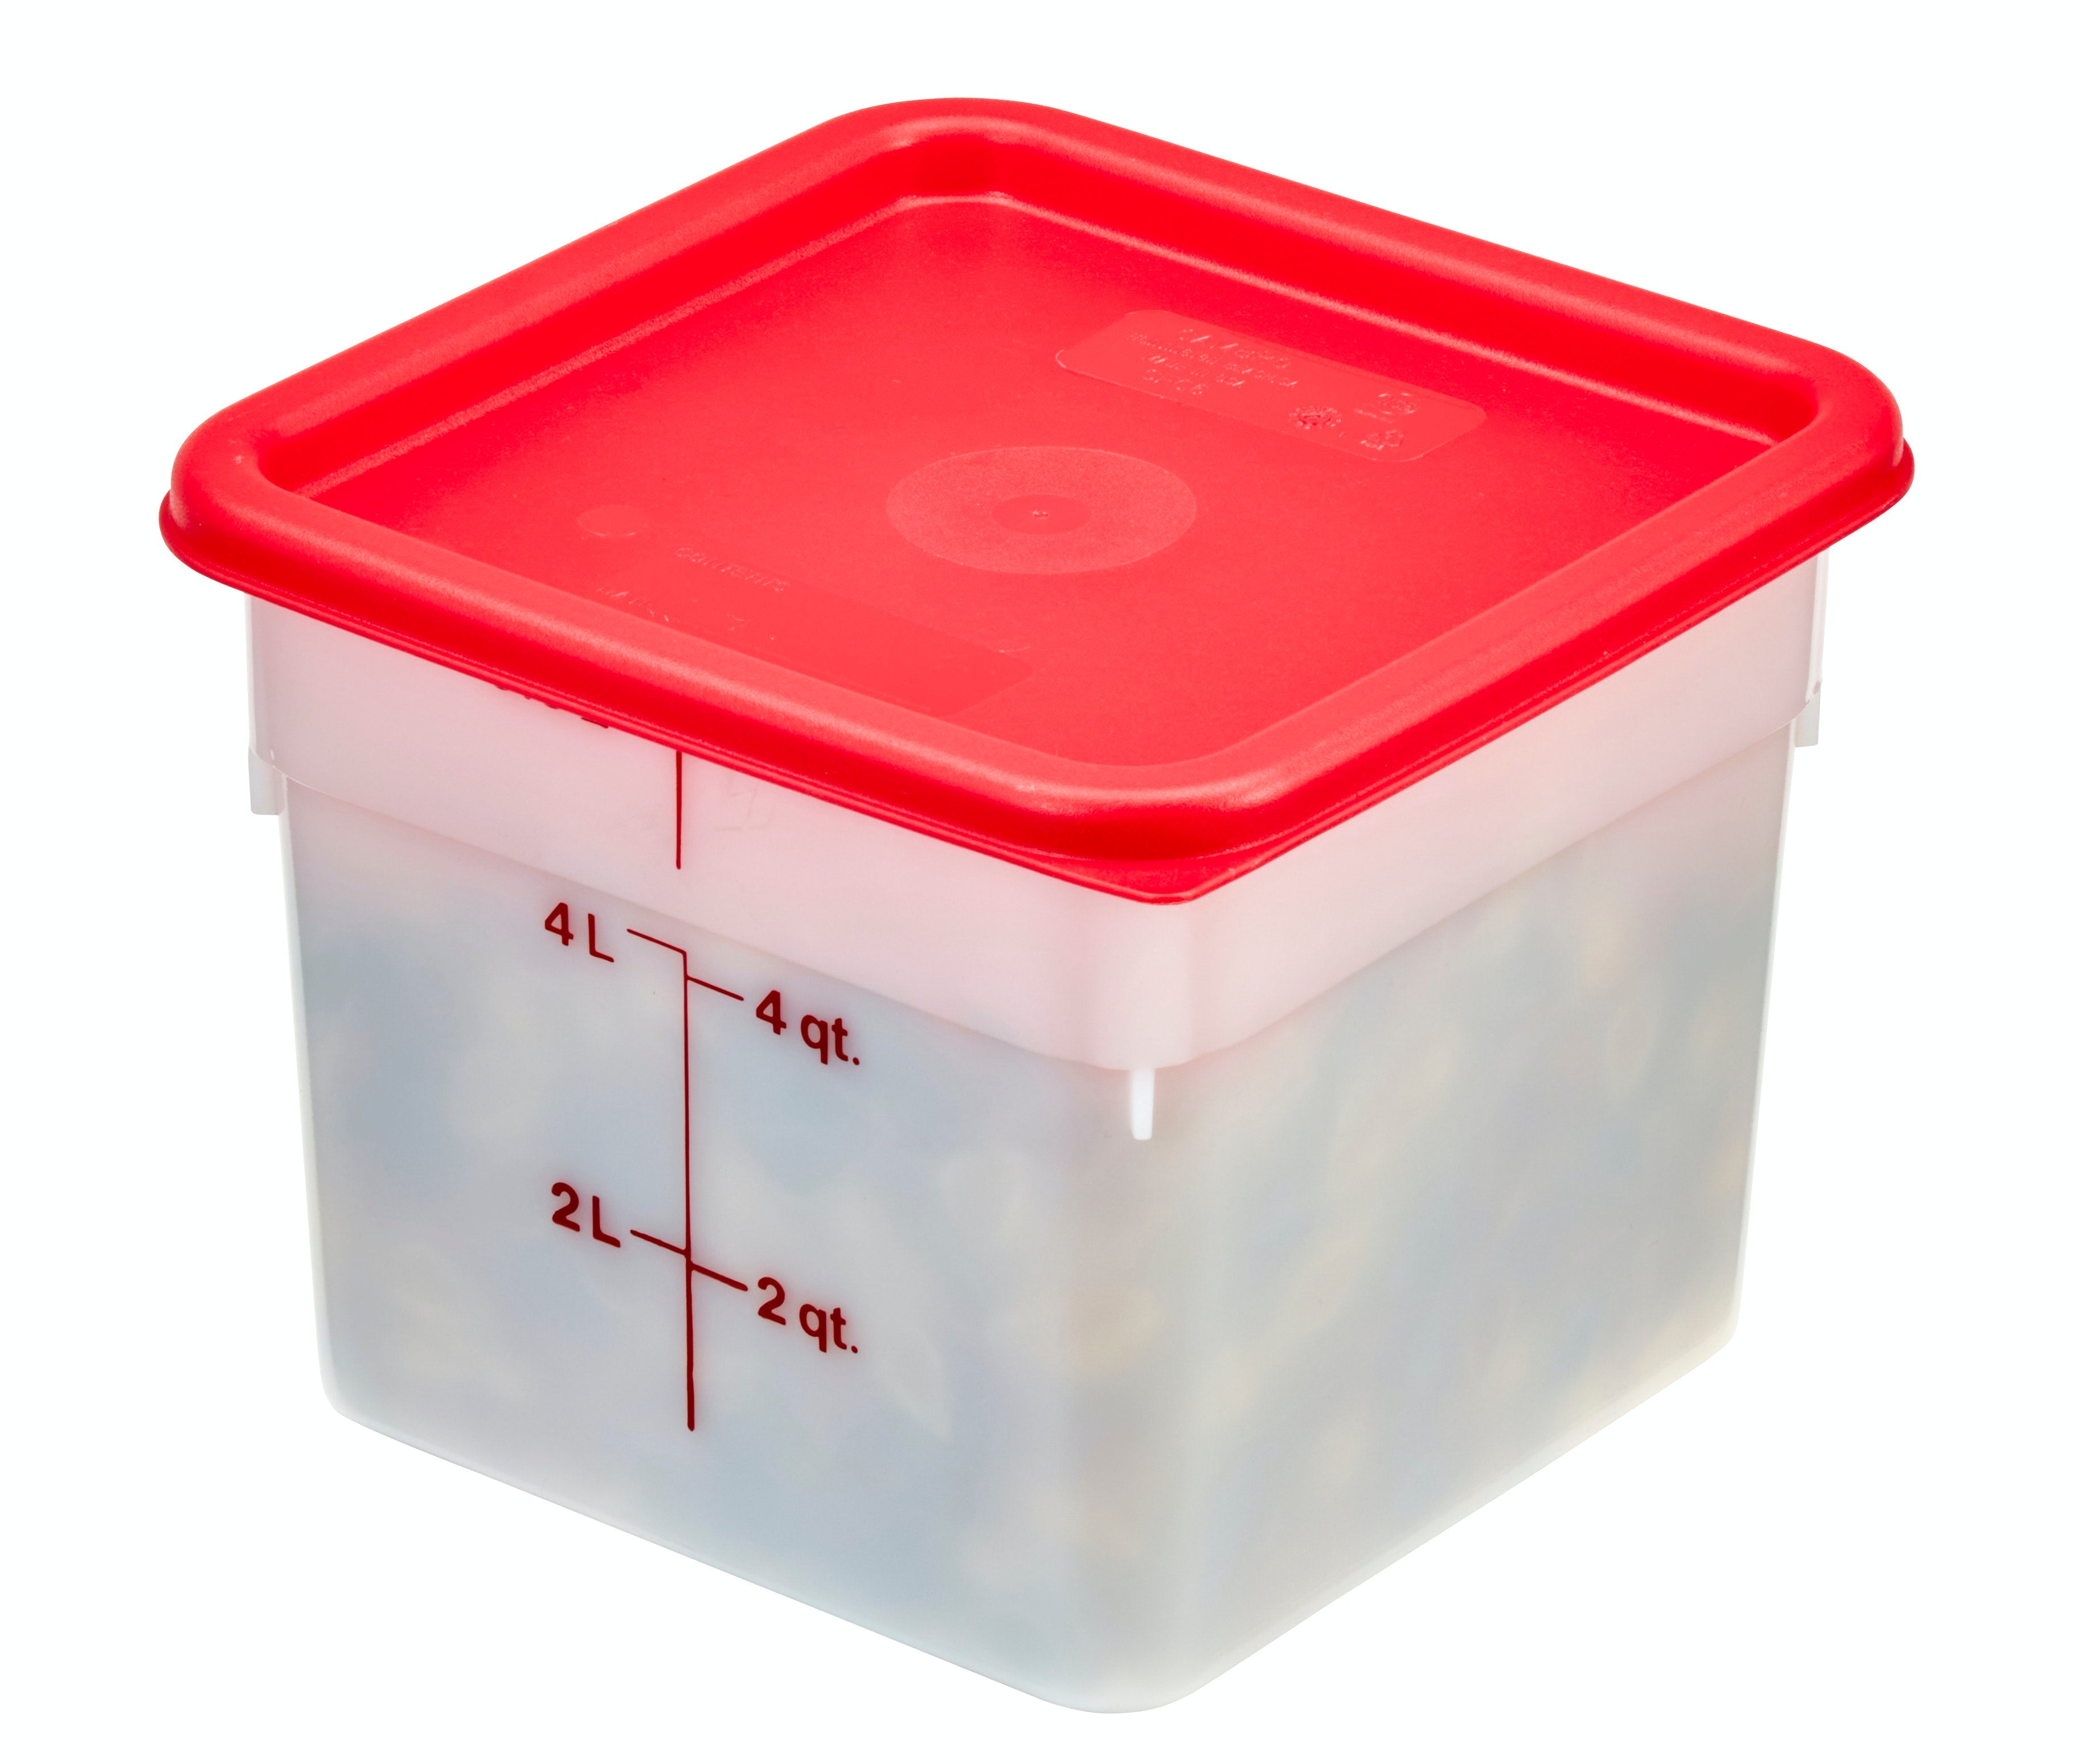 https://bigerics.com/cdn/shop/products/SKU-CAMBRO-MANUFACTURING-KITCHEN-Cambro-Square-6Qt-Container-with-Lid-Grab-N-Go-2-Pack-6SFSPPSW2190-product_name-Food-Storage-Container-product_size.jpg?v=1663876220